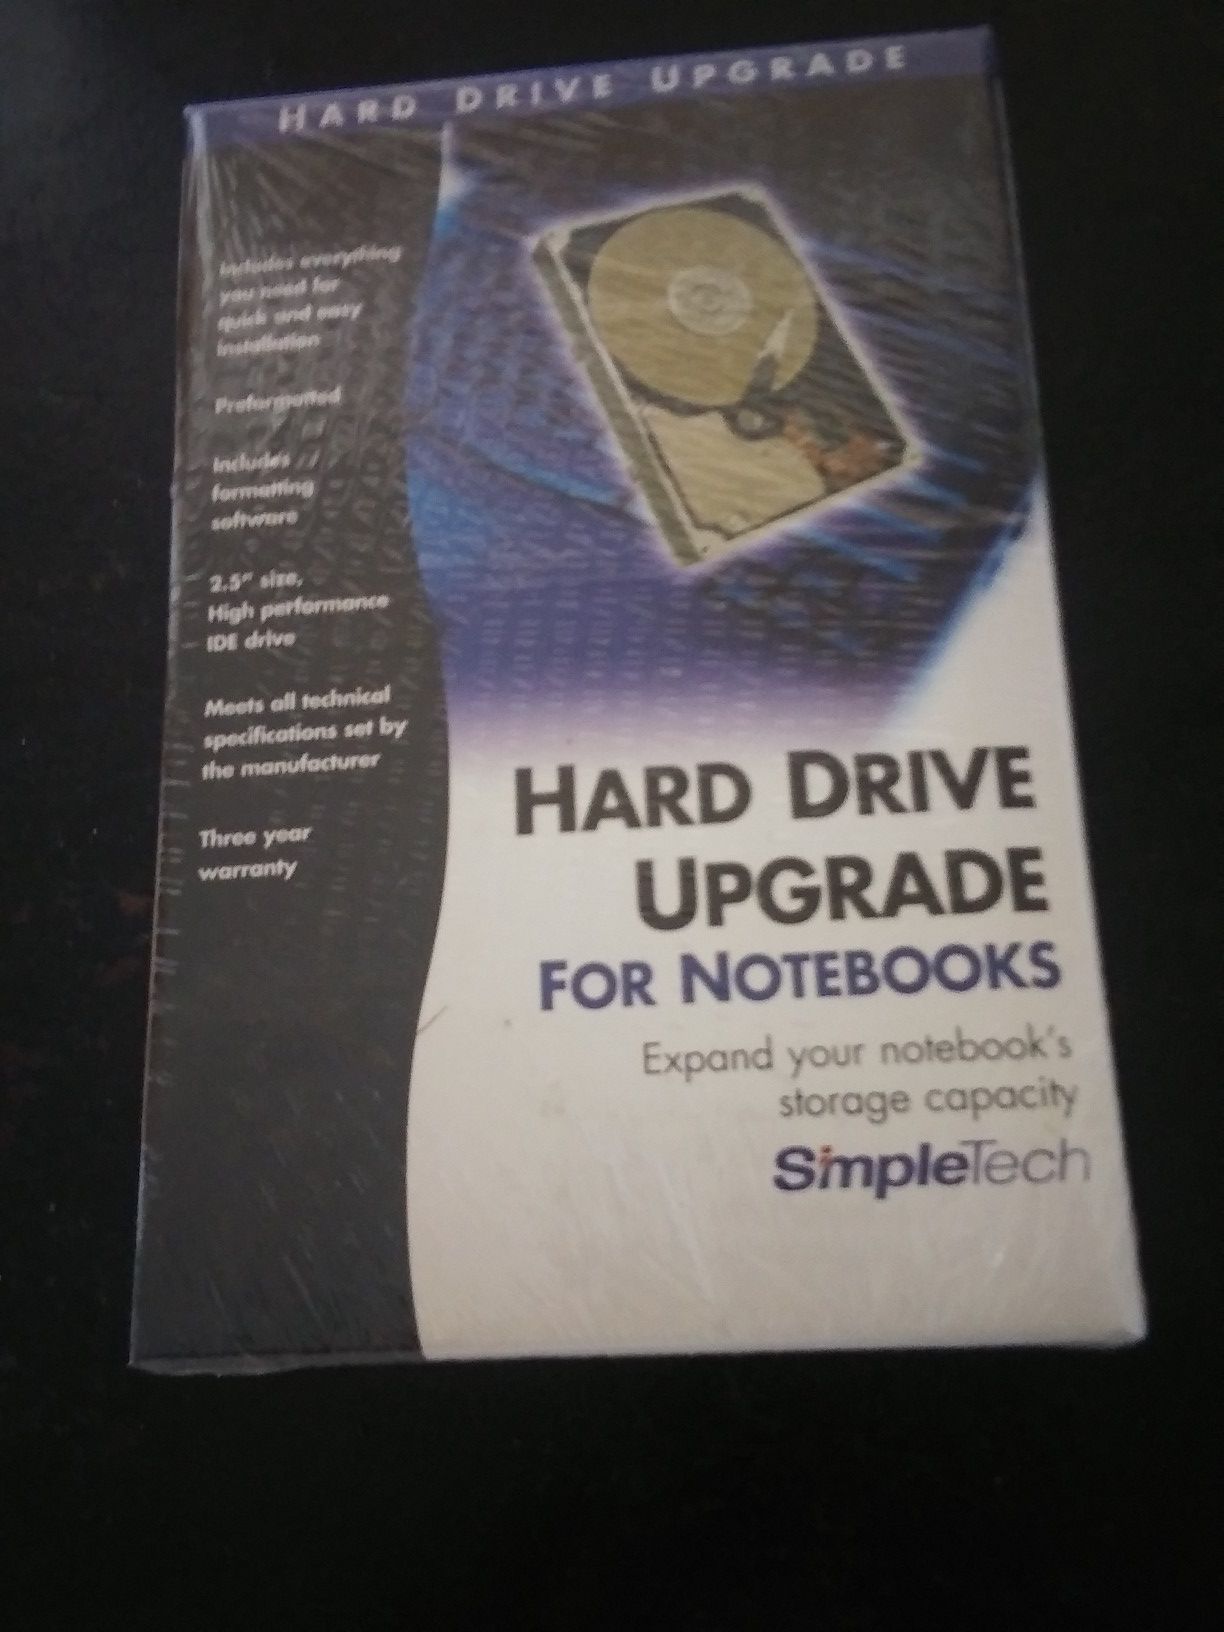 Hard drive upgrade for notebooks